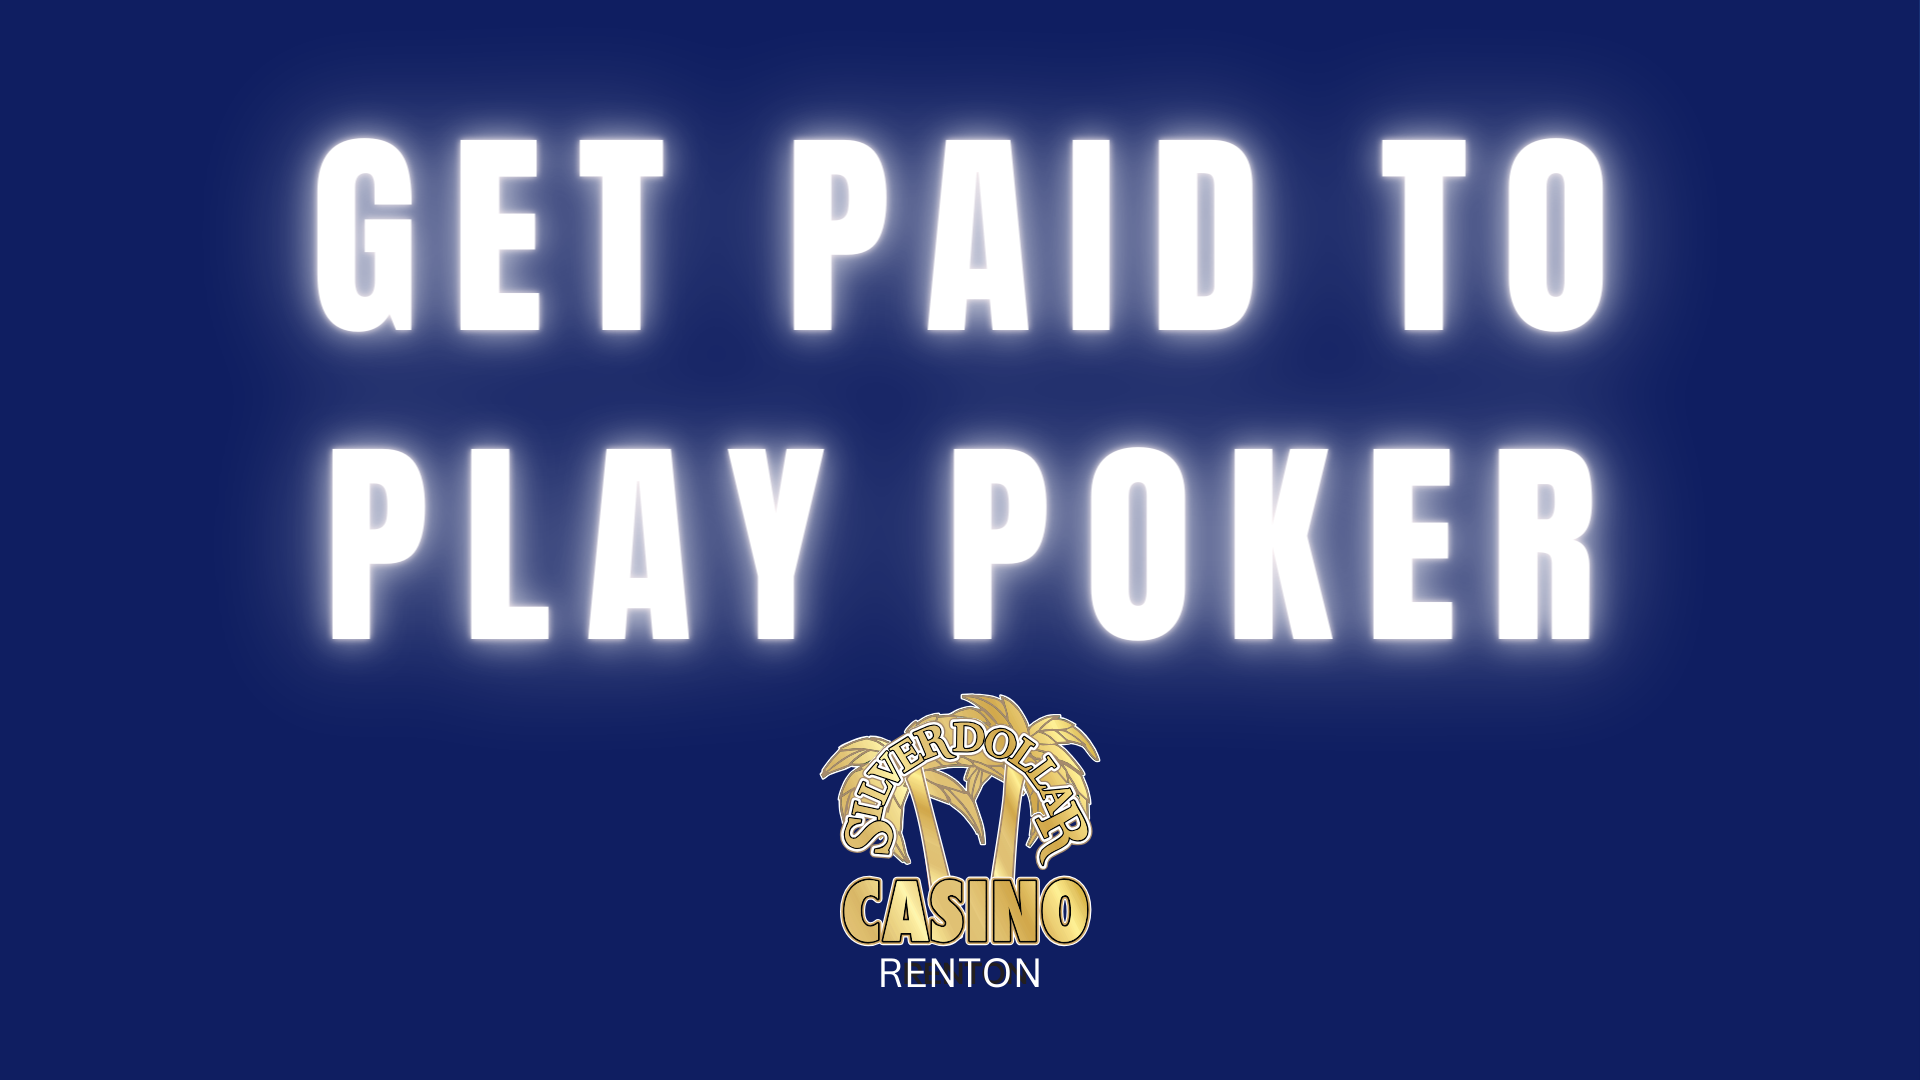 Get Paid to Play Poker at Silver Dollar Casino Renton, Washington | Play and get $50 in chips or cash. Learn more